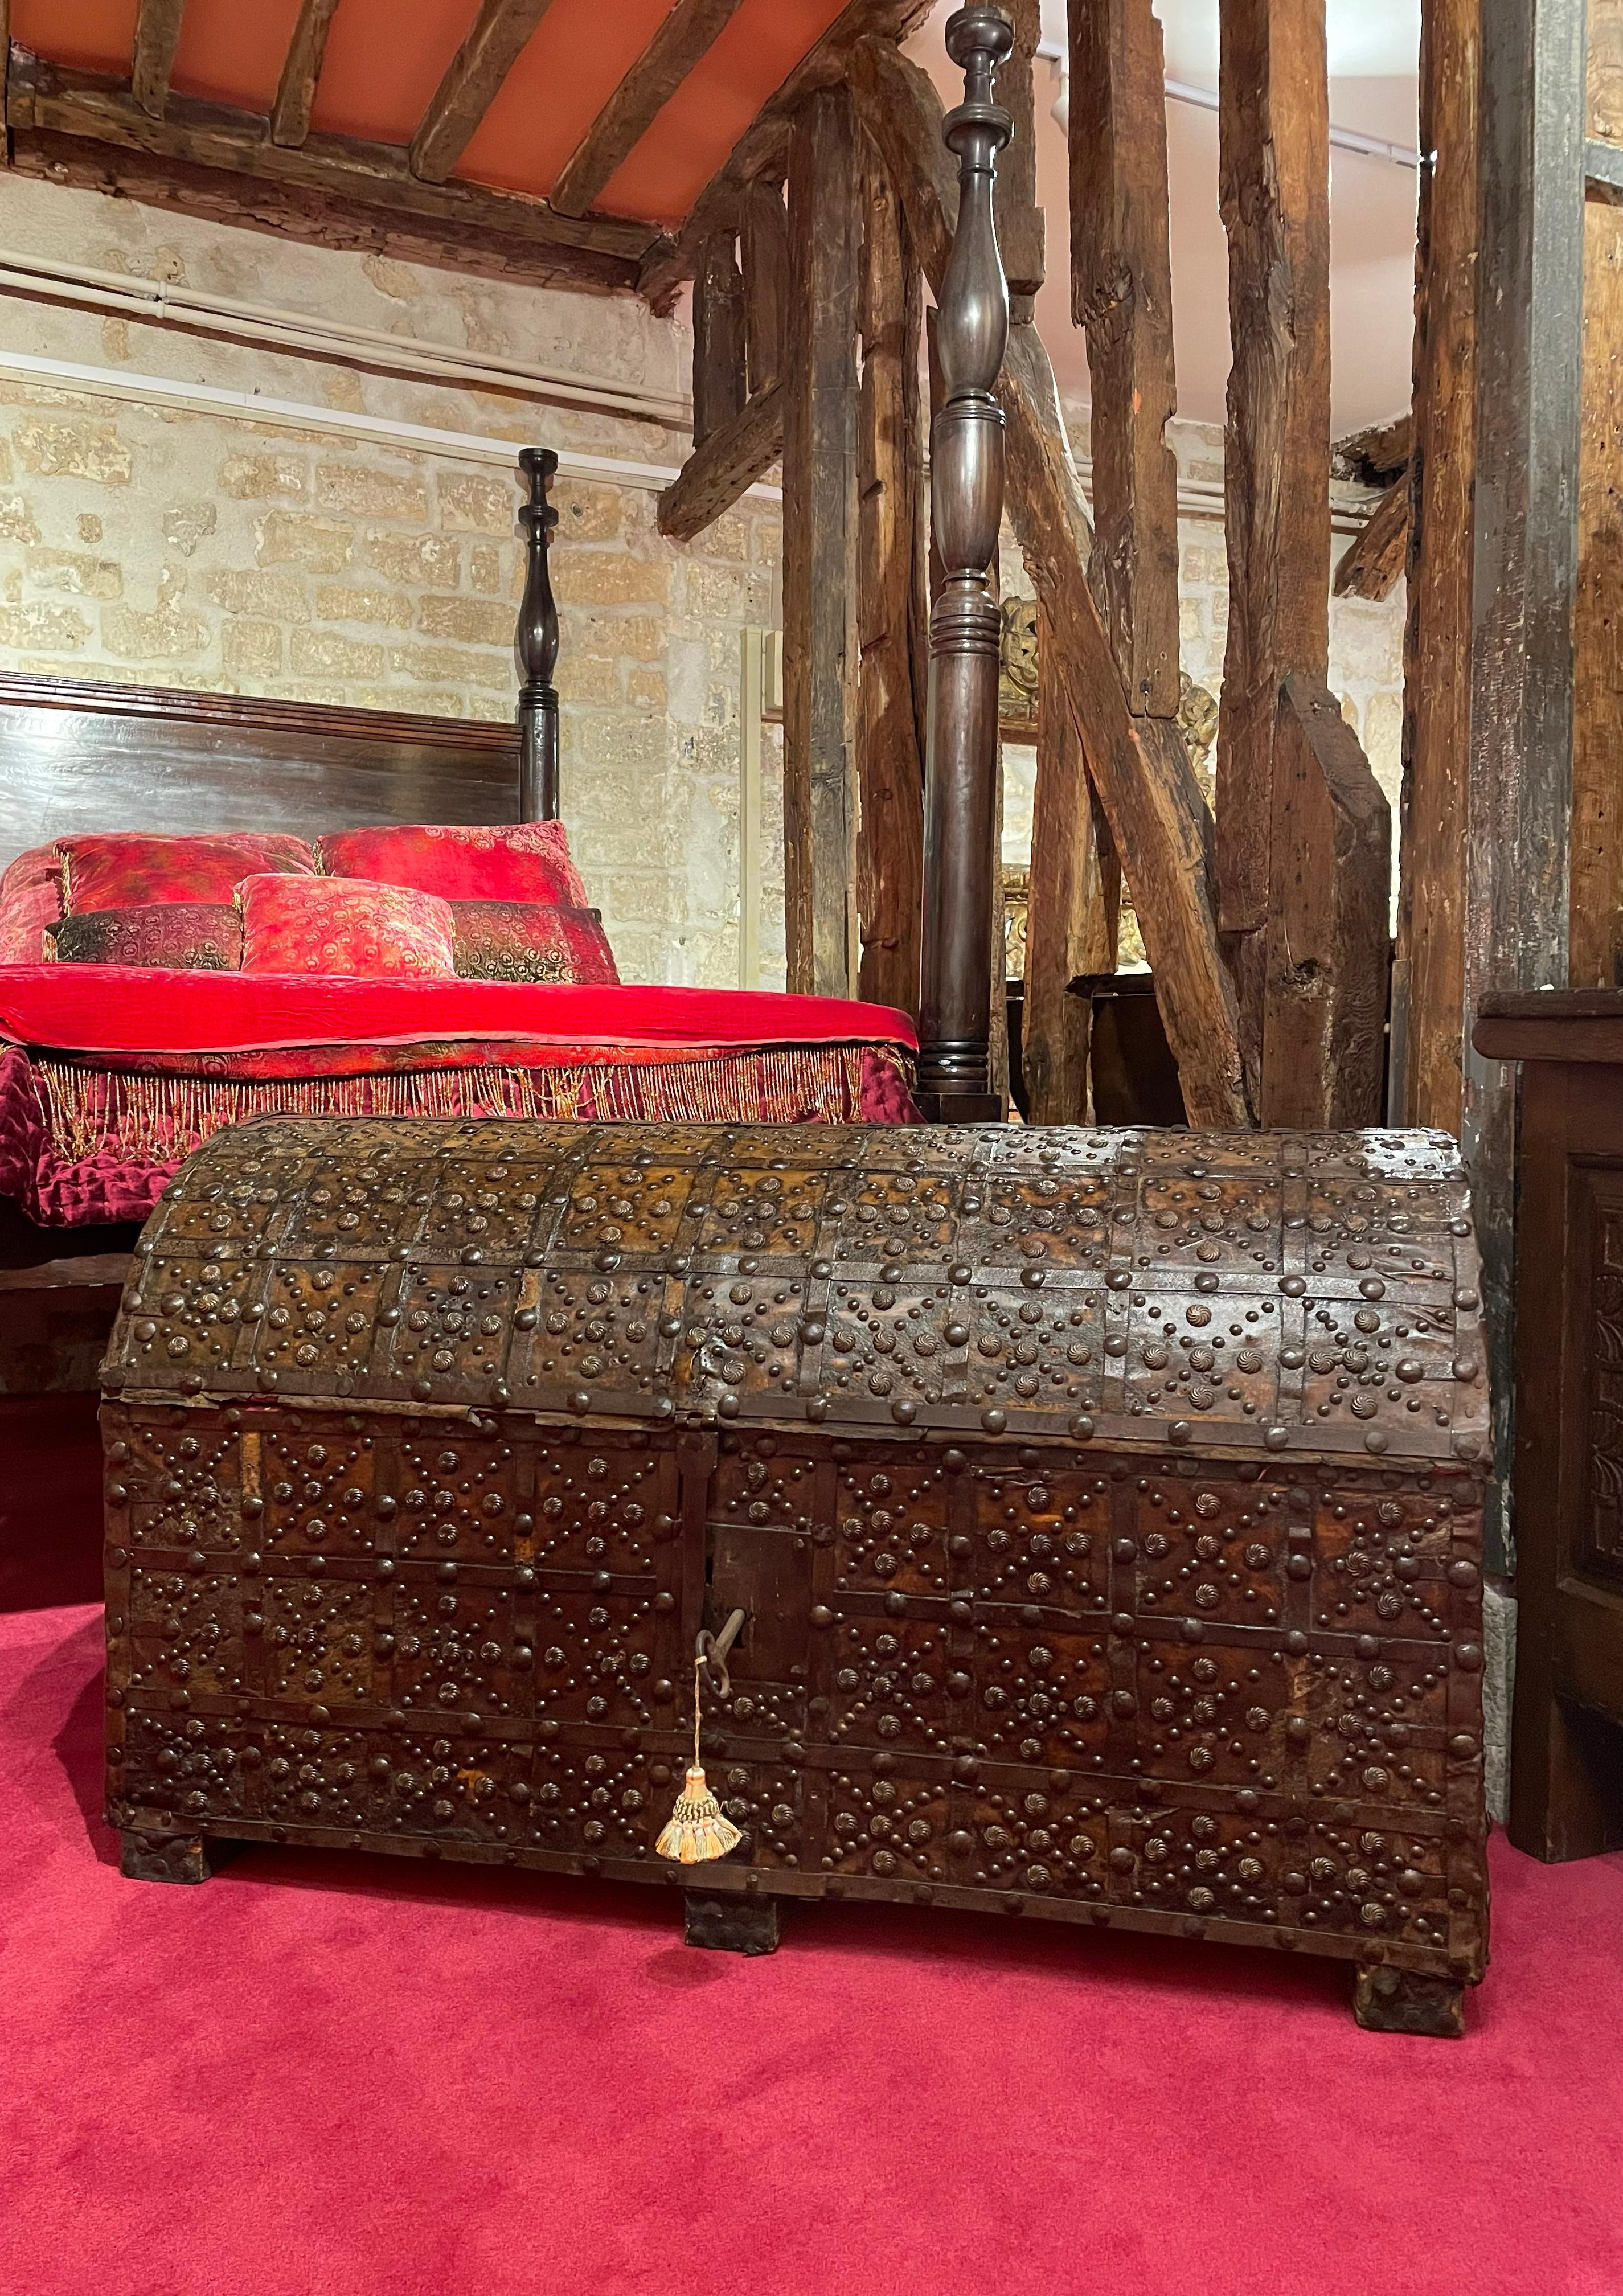 IMPORTANT TRAVEL CHEST WITH A DOMED TOP

ORIGIN : SPAIN
PERIOD : 16th CENTURY

Height : 72 cm
Length : 125 cm
Depth : 56 cm 


Walnut
Boarded and Studded
Good Condition
Original lock and key

A beautiful execution of an important